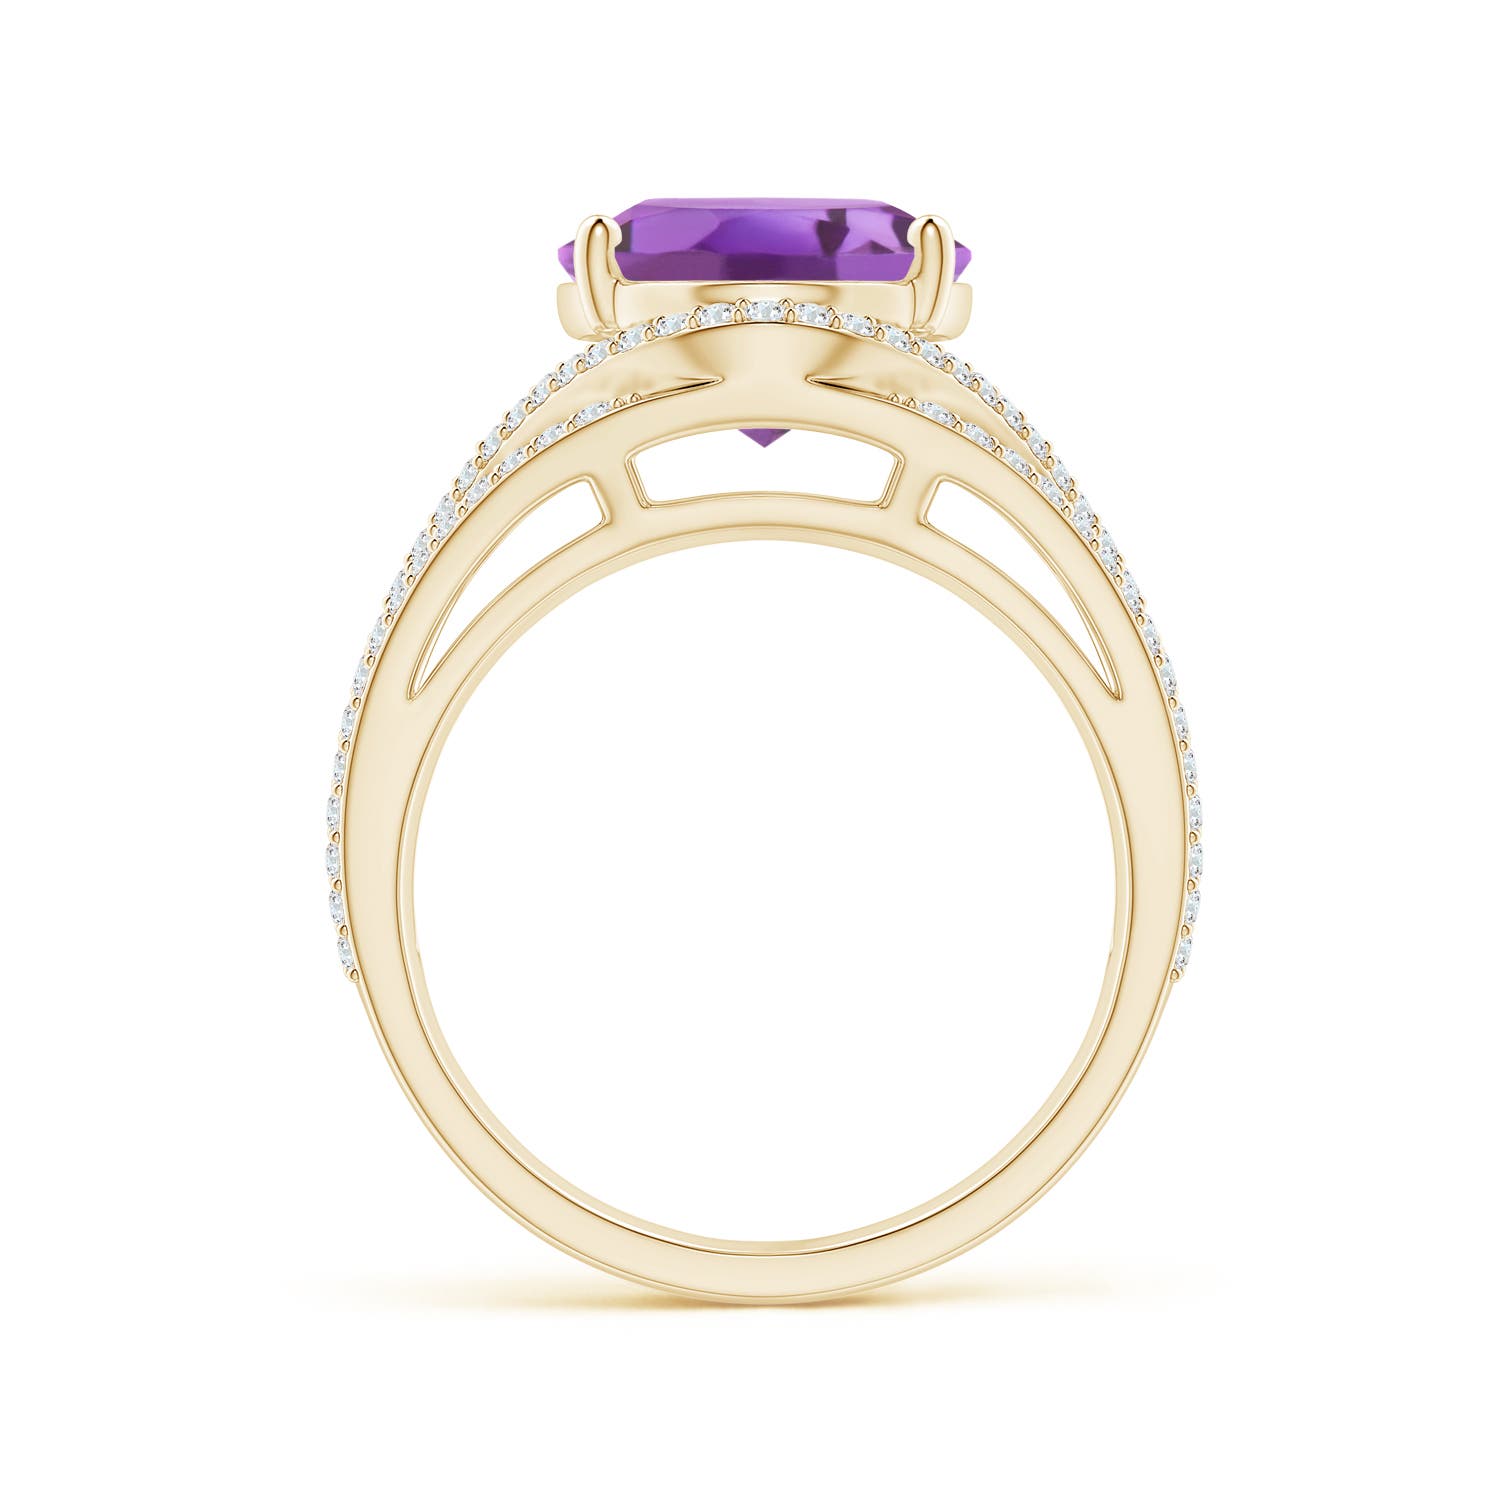 A - Amethyst / 5.89 CT / 14 KT Yellow Gold